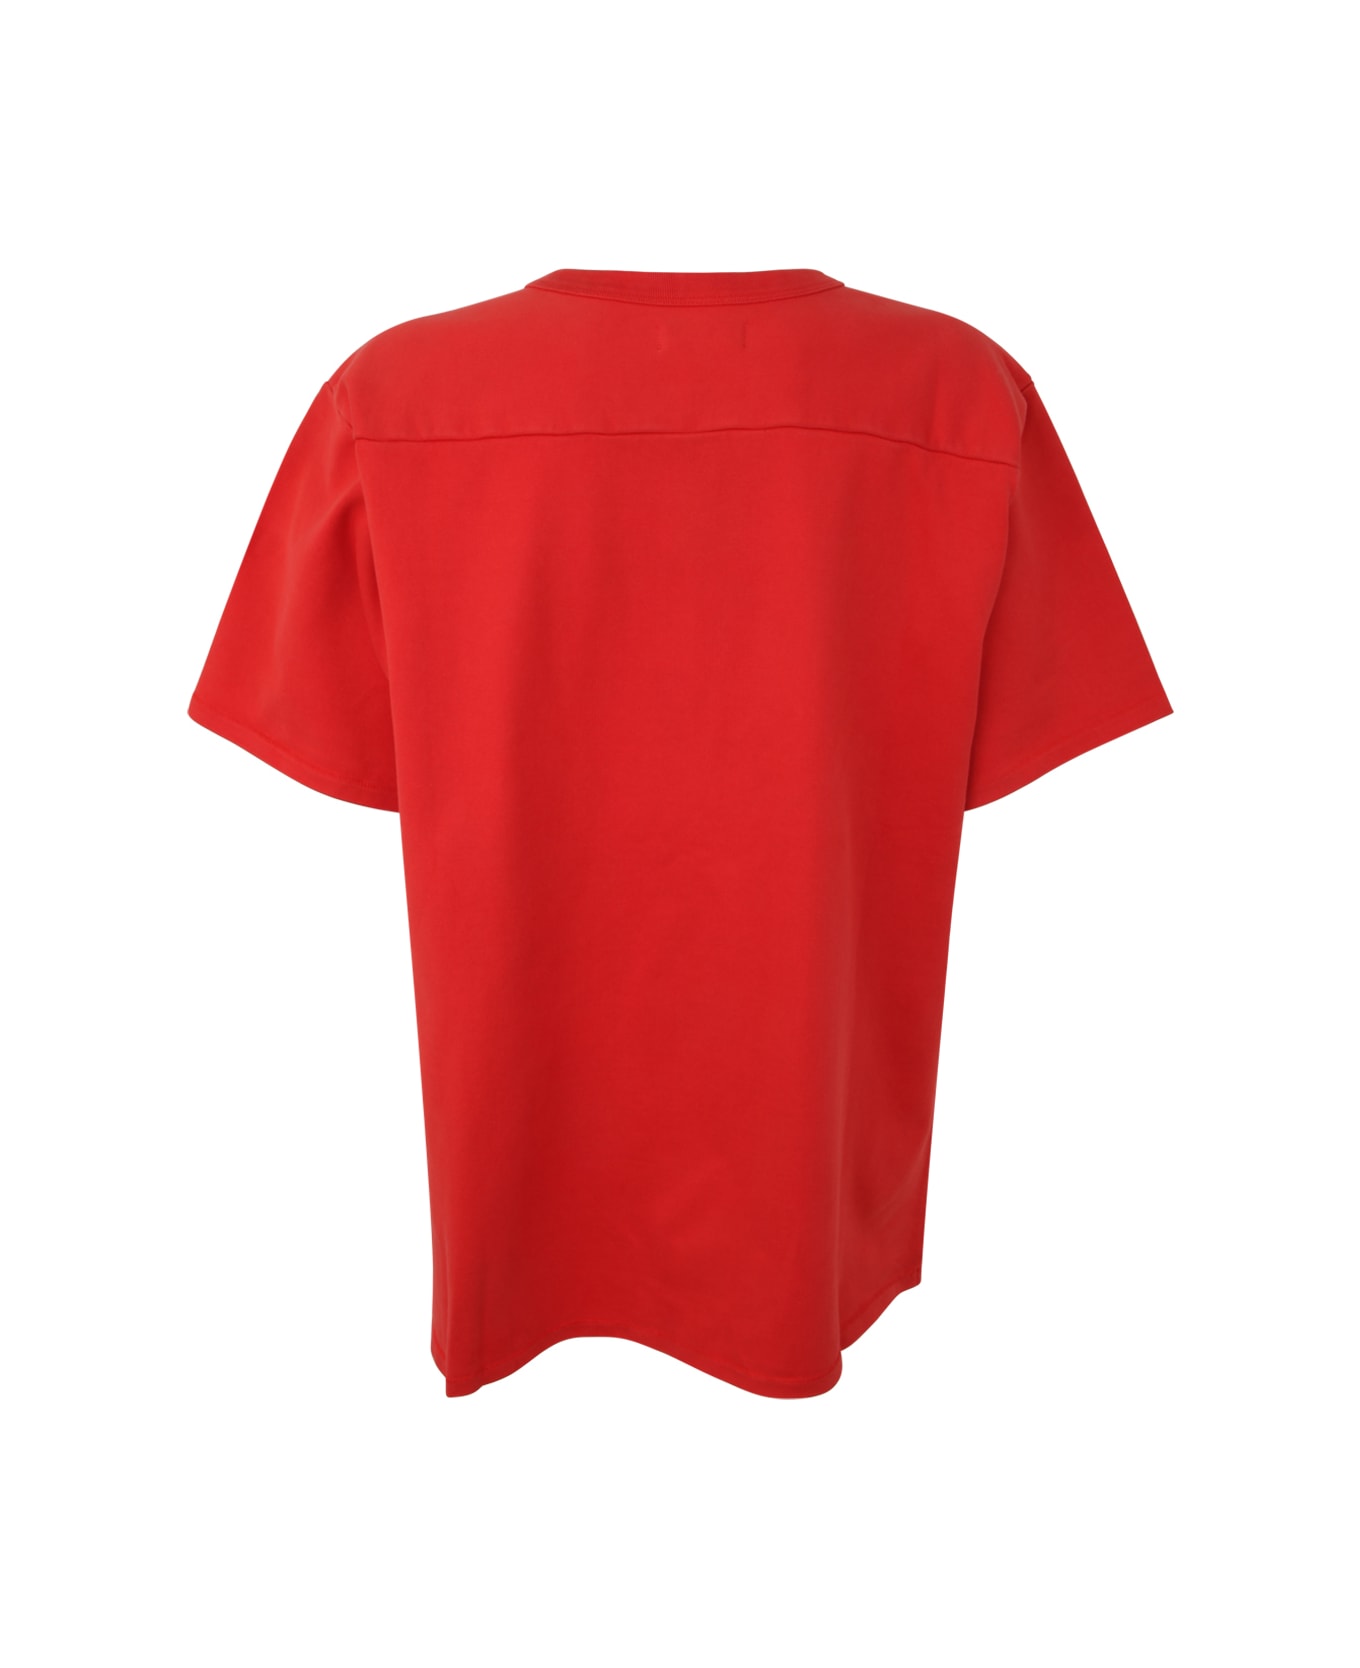 ERL Unisex Football Shirt Knit - Red